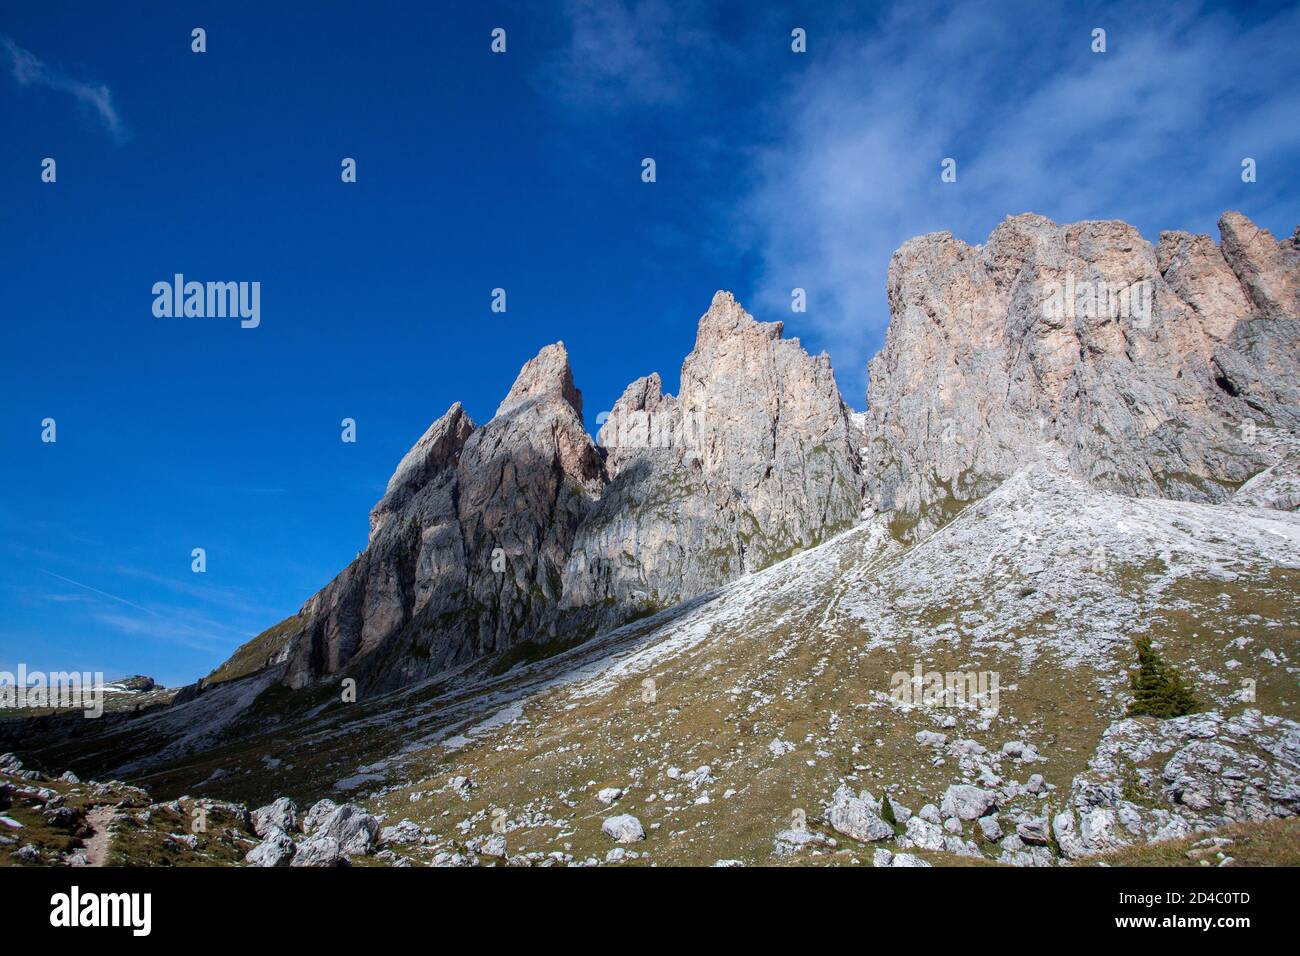 The craggy peaks of the Geisler group of peaks in the Italian Dolomites, in the Alps of South Tyrol, Italy, rise up before a mostly blue sky Stock Photo